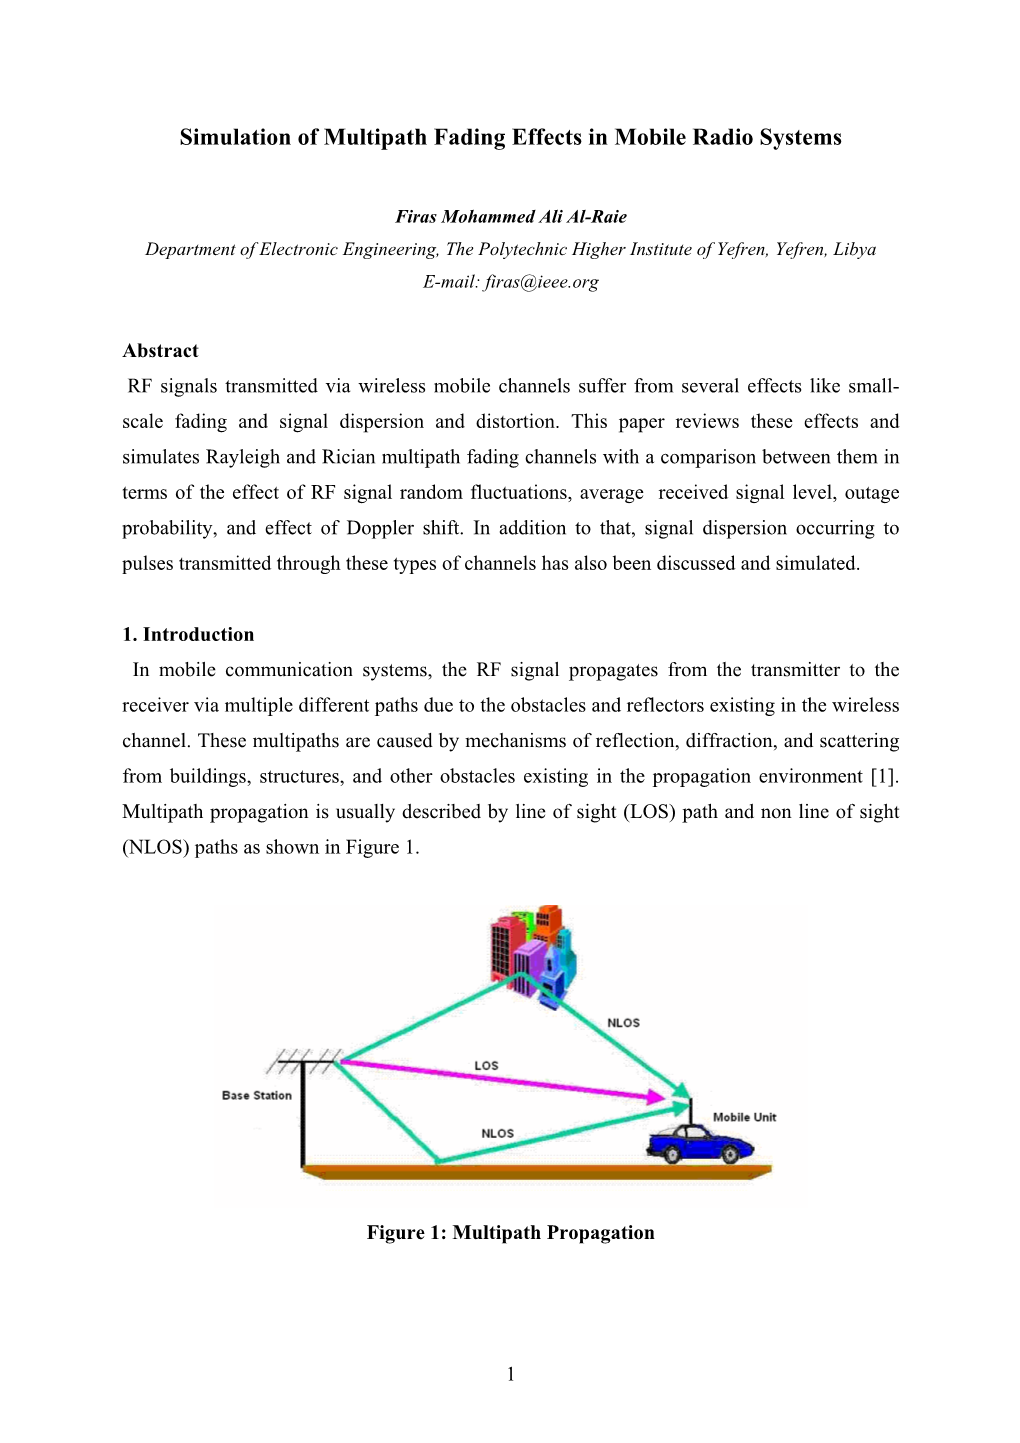 Simulation of Multipath Fading Effects in Mobile Radio Systems